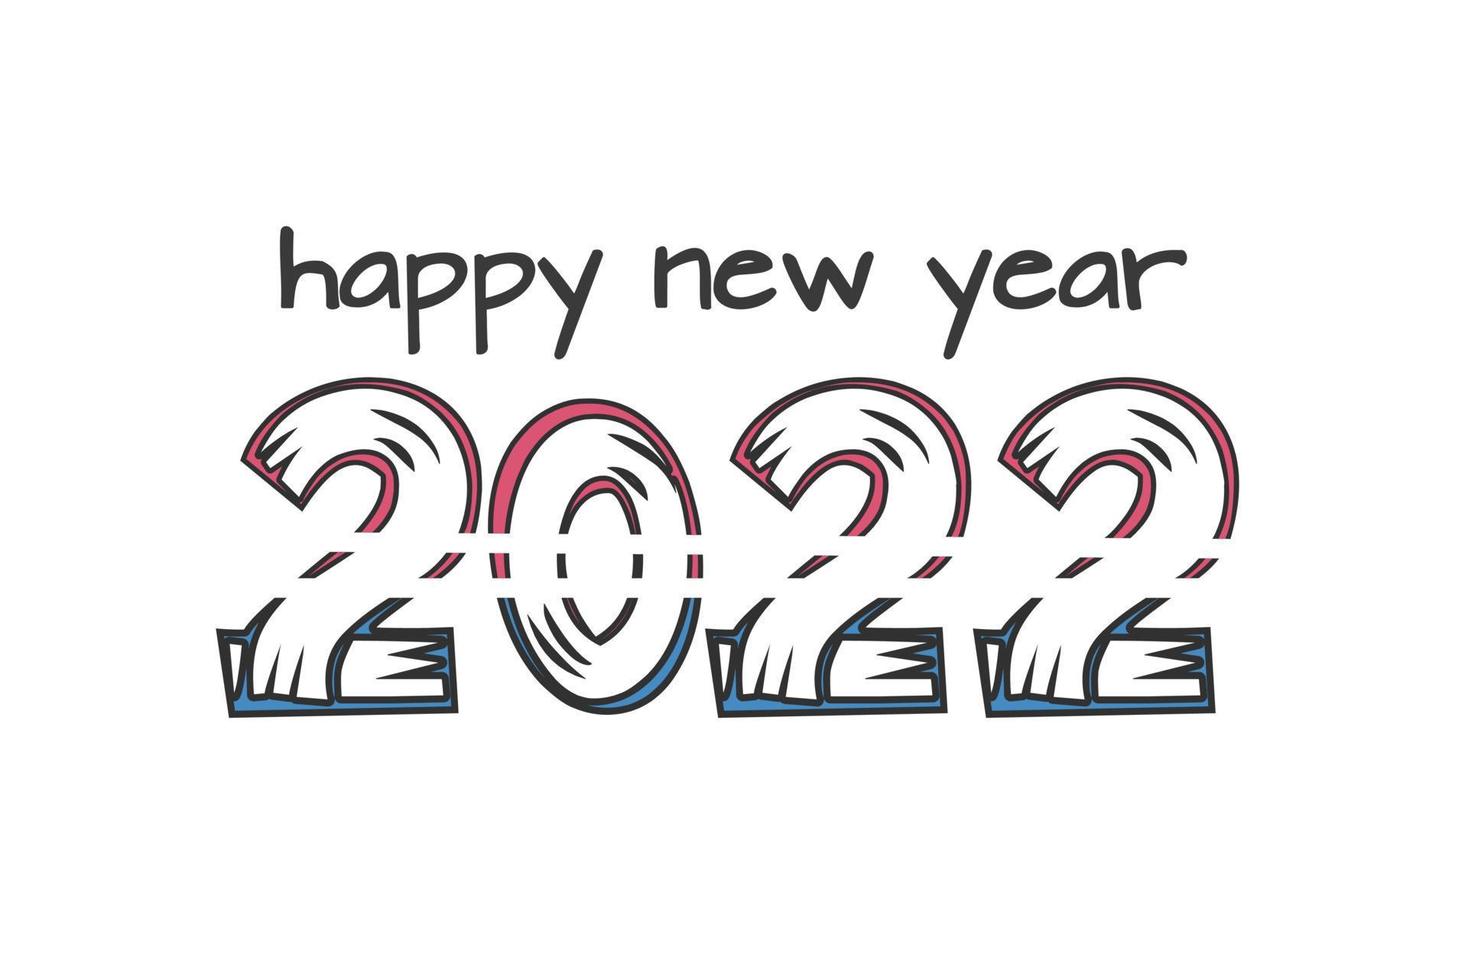 text happy new year 2022, free vector